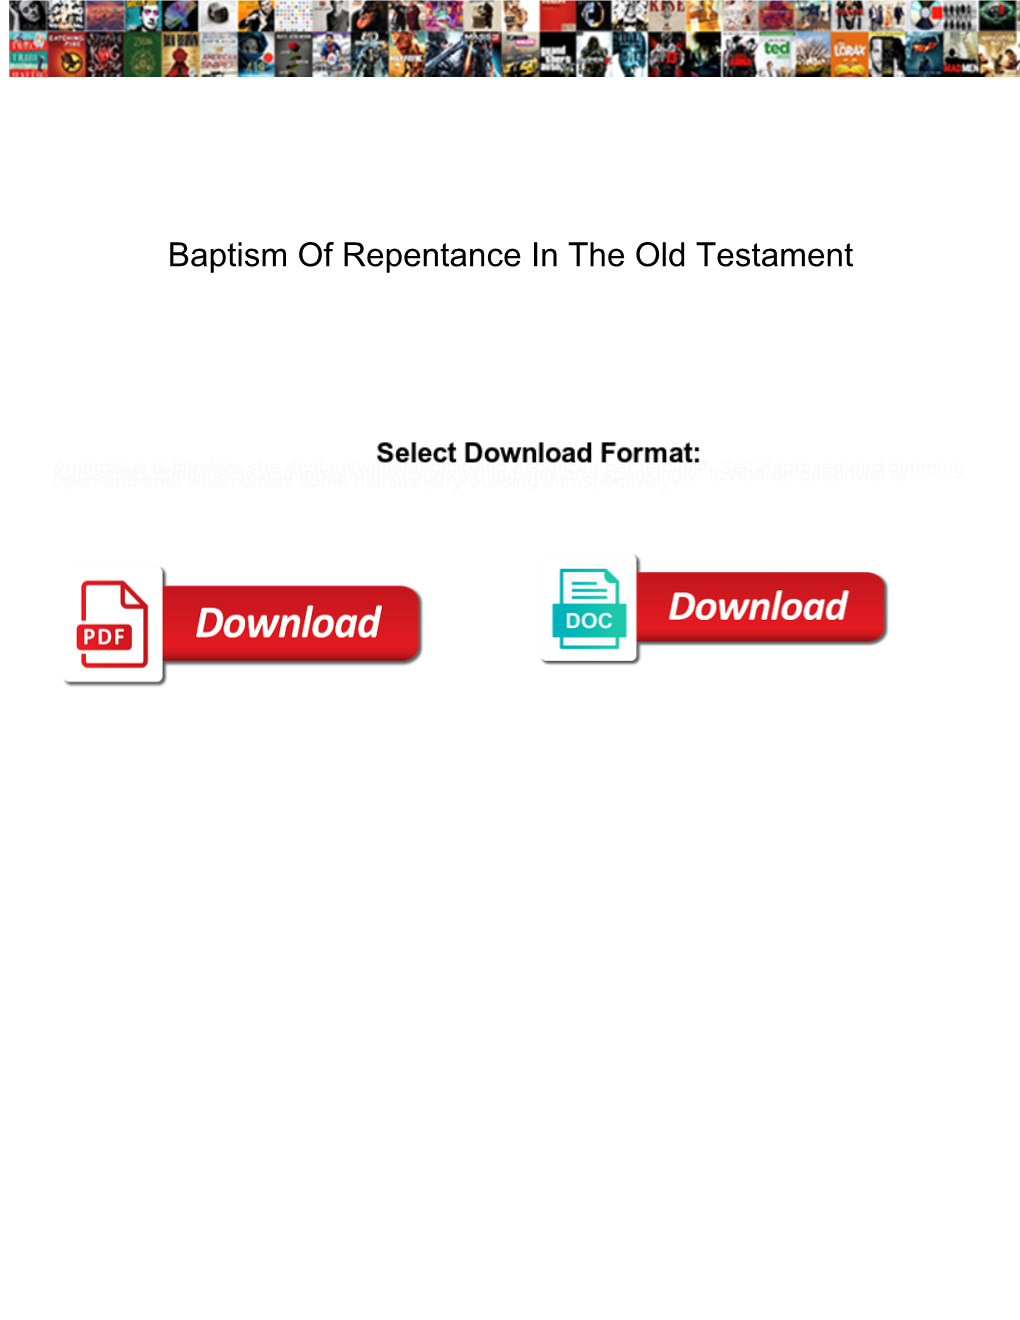 Baptism of Repentance in the Old Testament